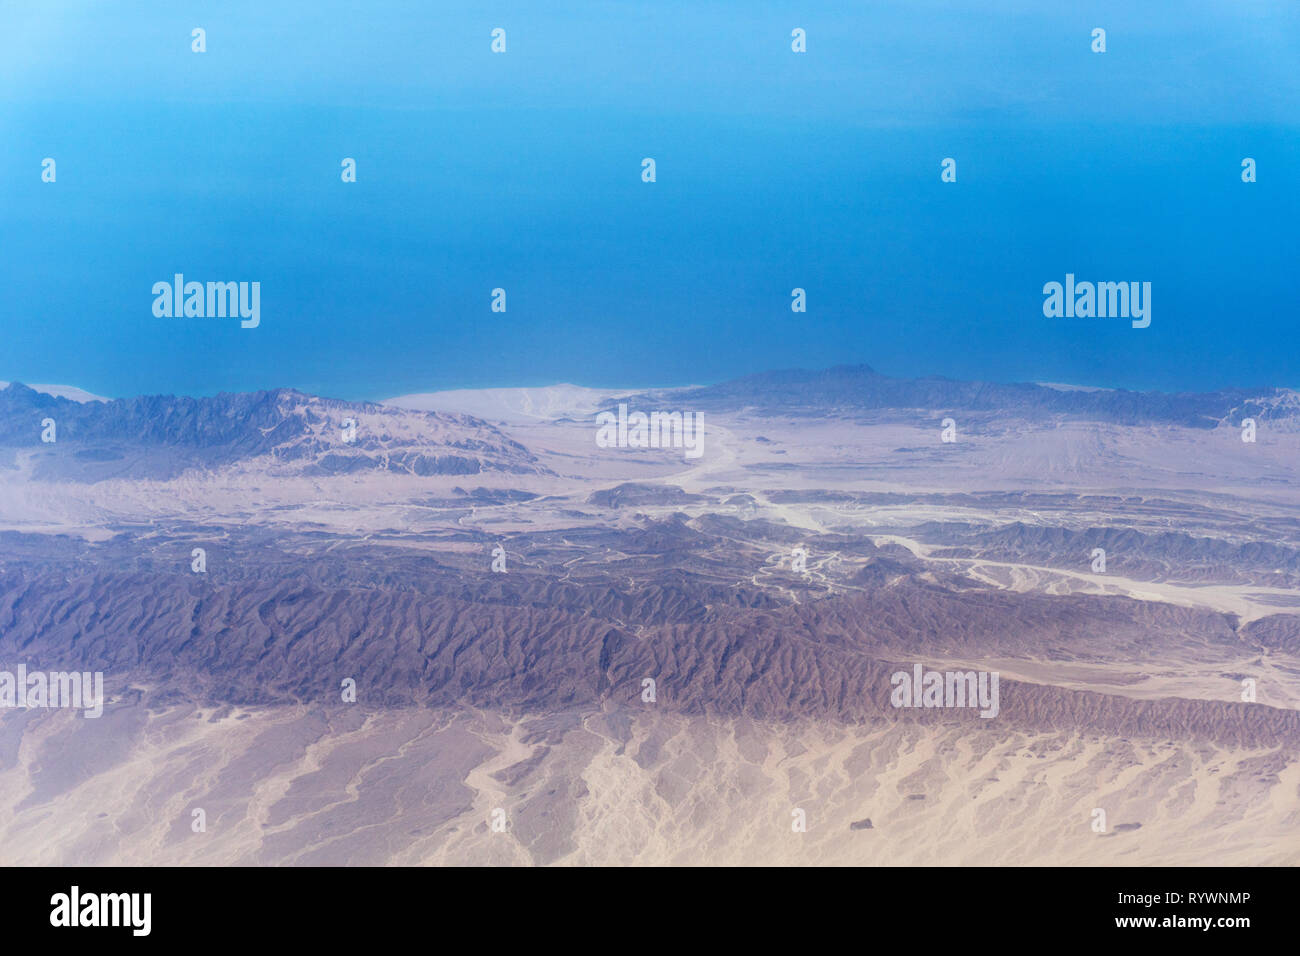 Blue sky over hilly terrain, aerial view Stock Photo